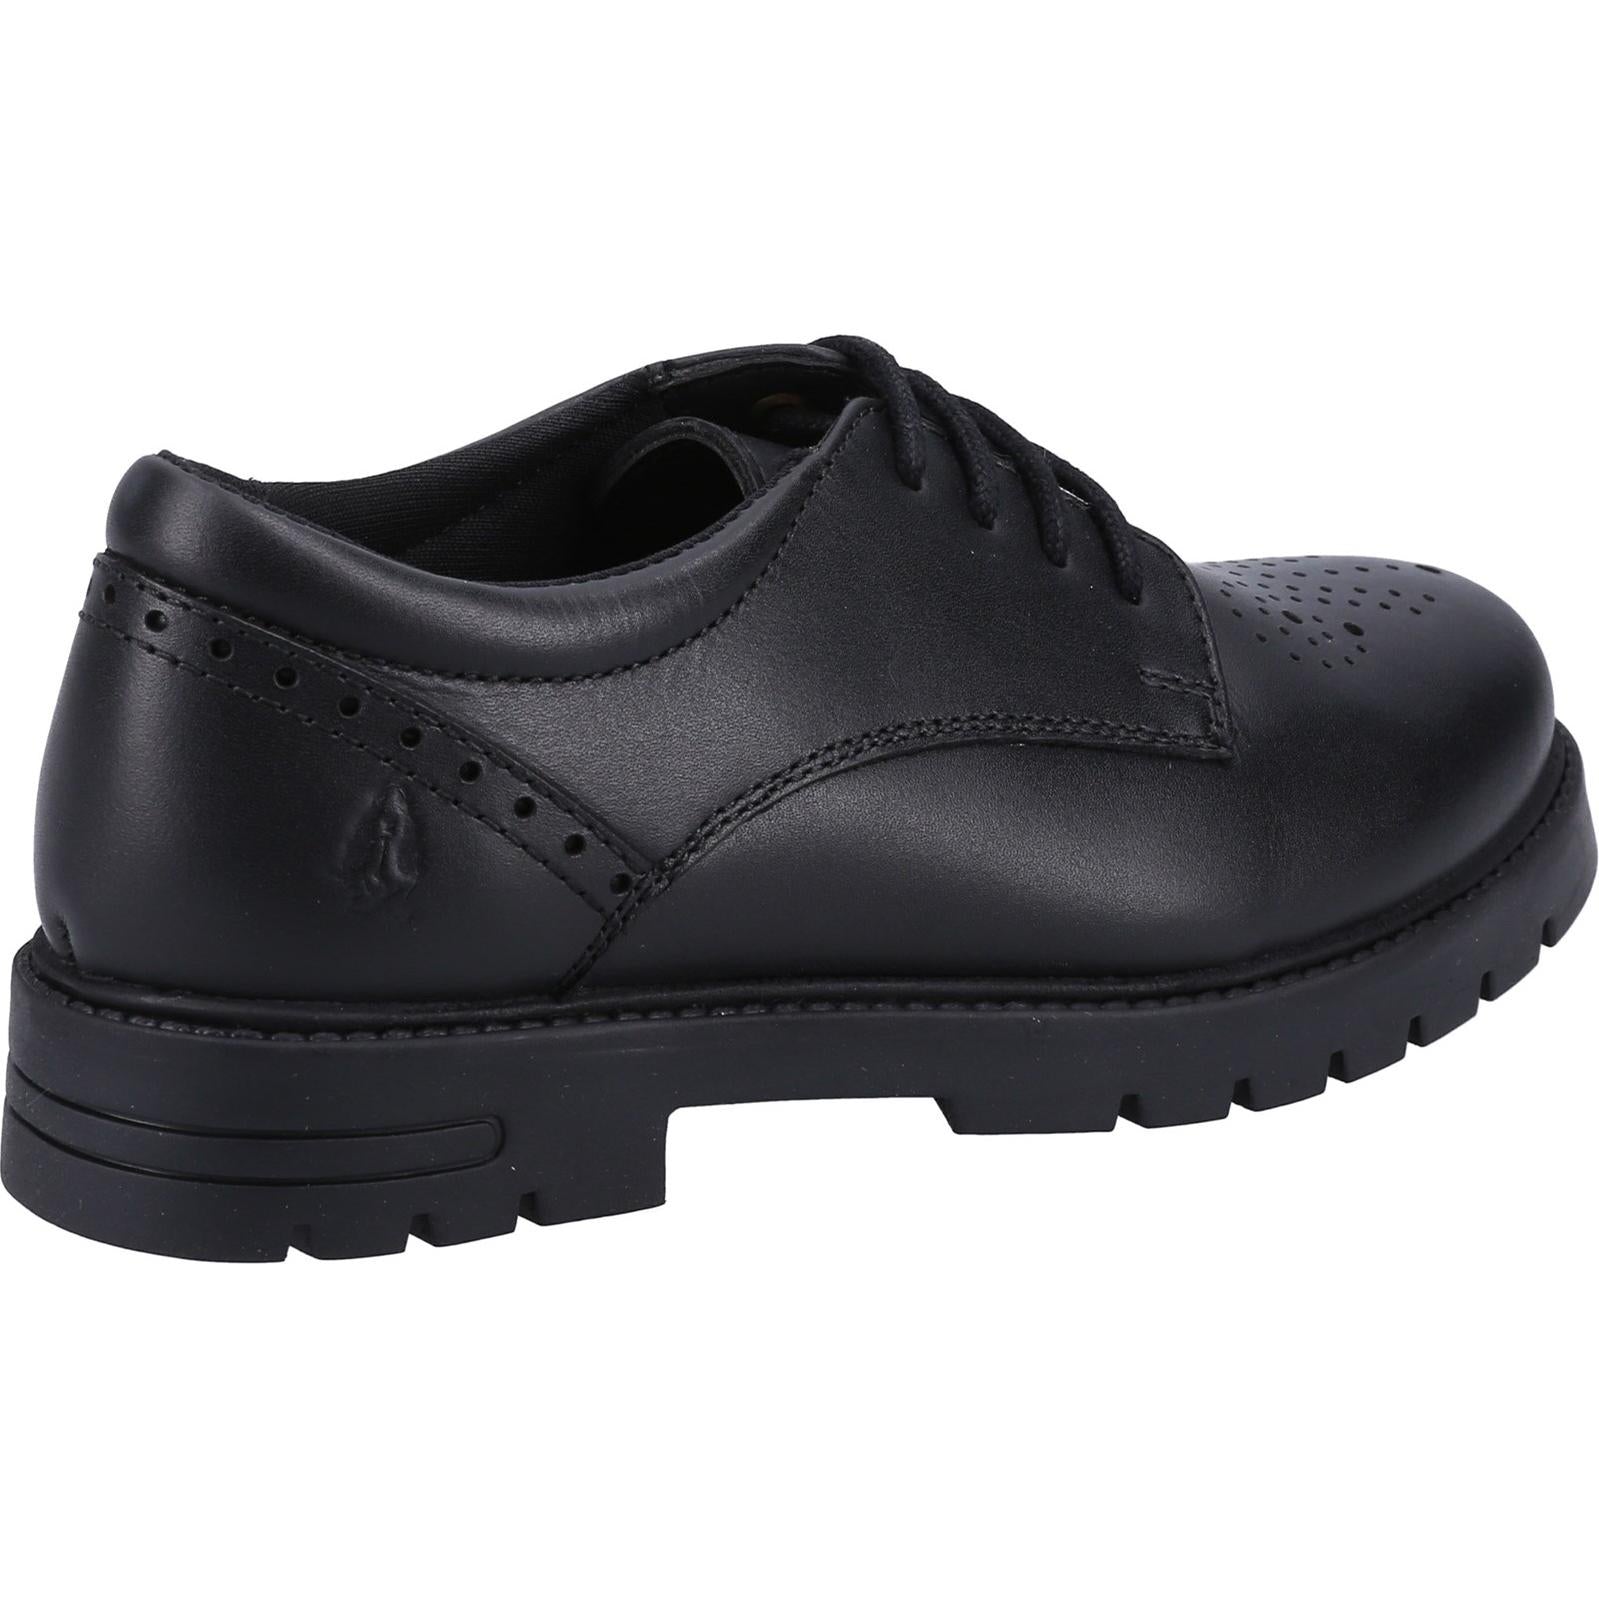 Hush Puppies Jayne Lace Up SNR Shoe